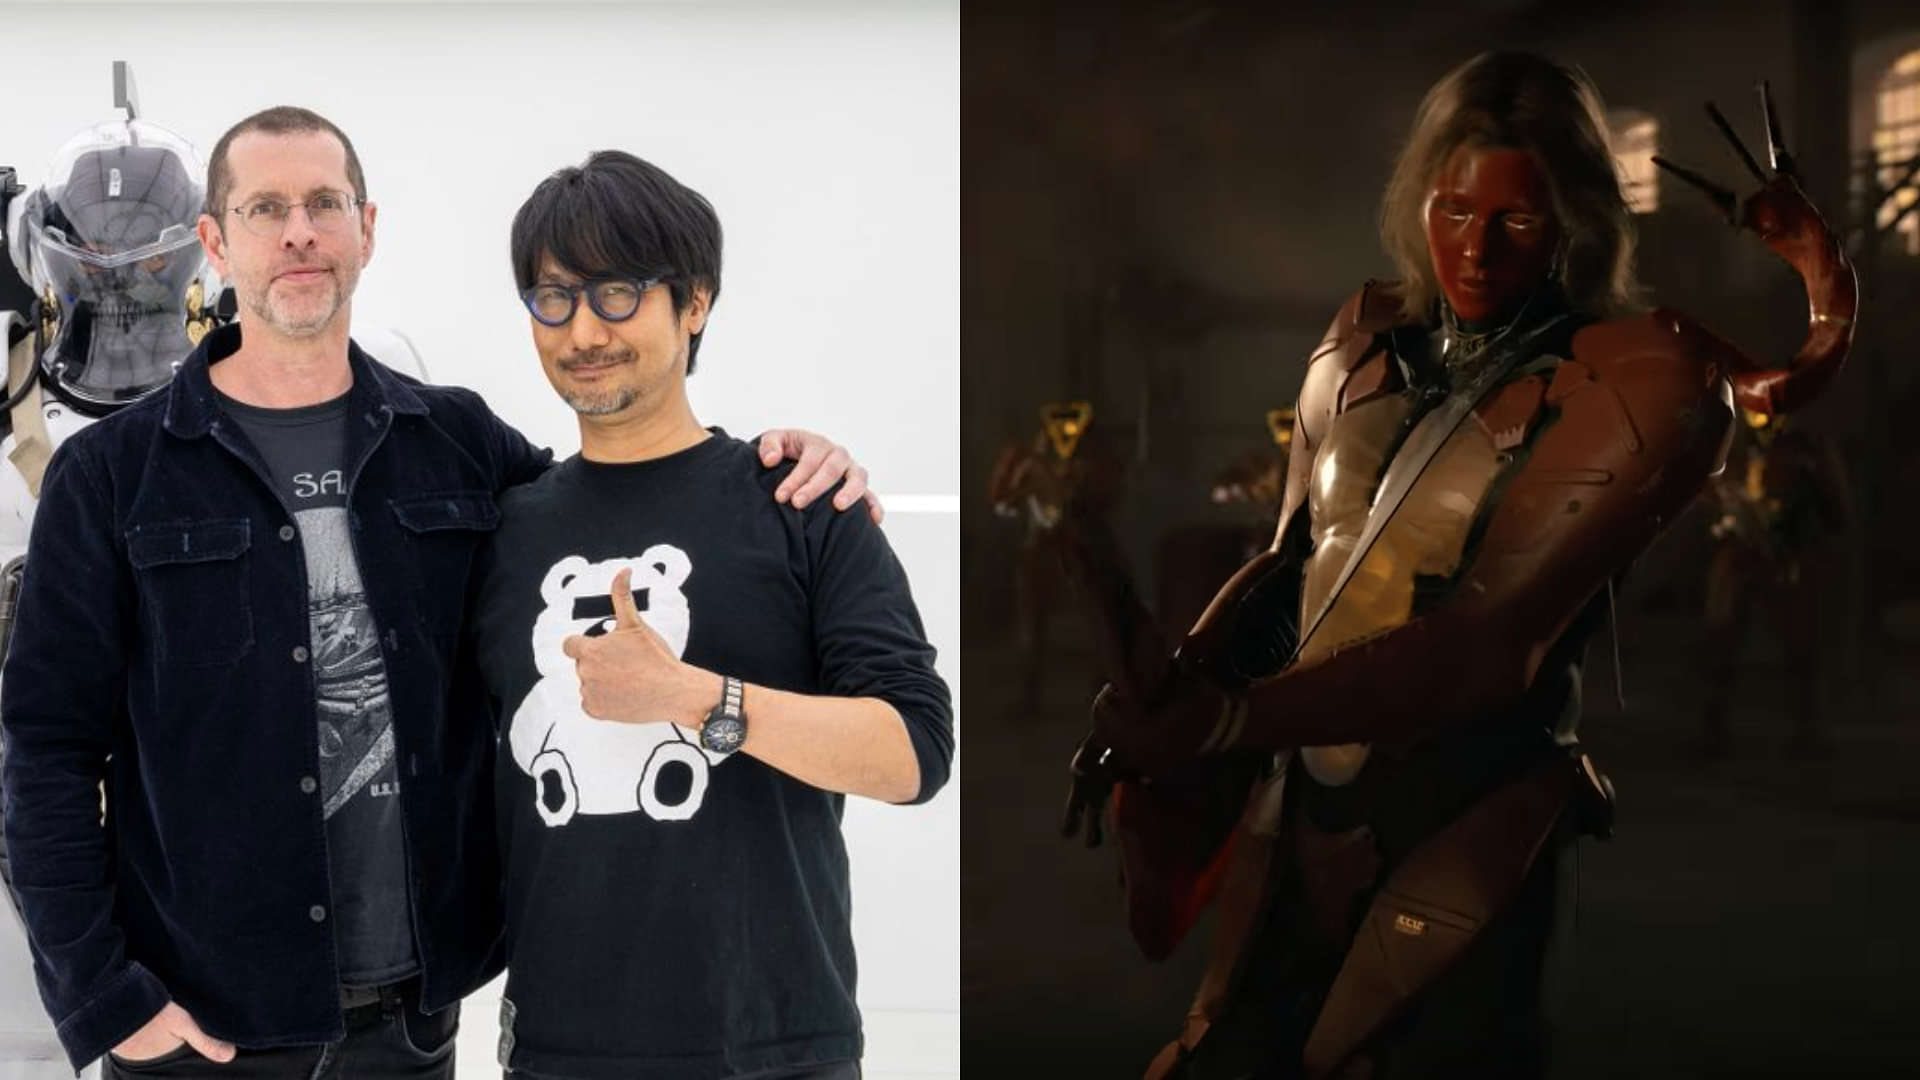 Latest Collaboration Rumors of Hideo Kojima and Game of Thrones